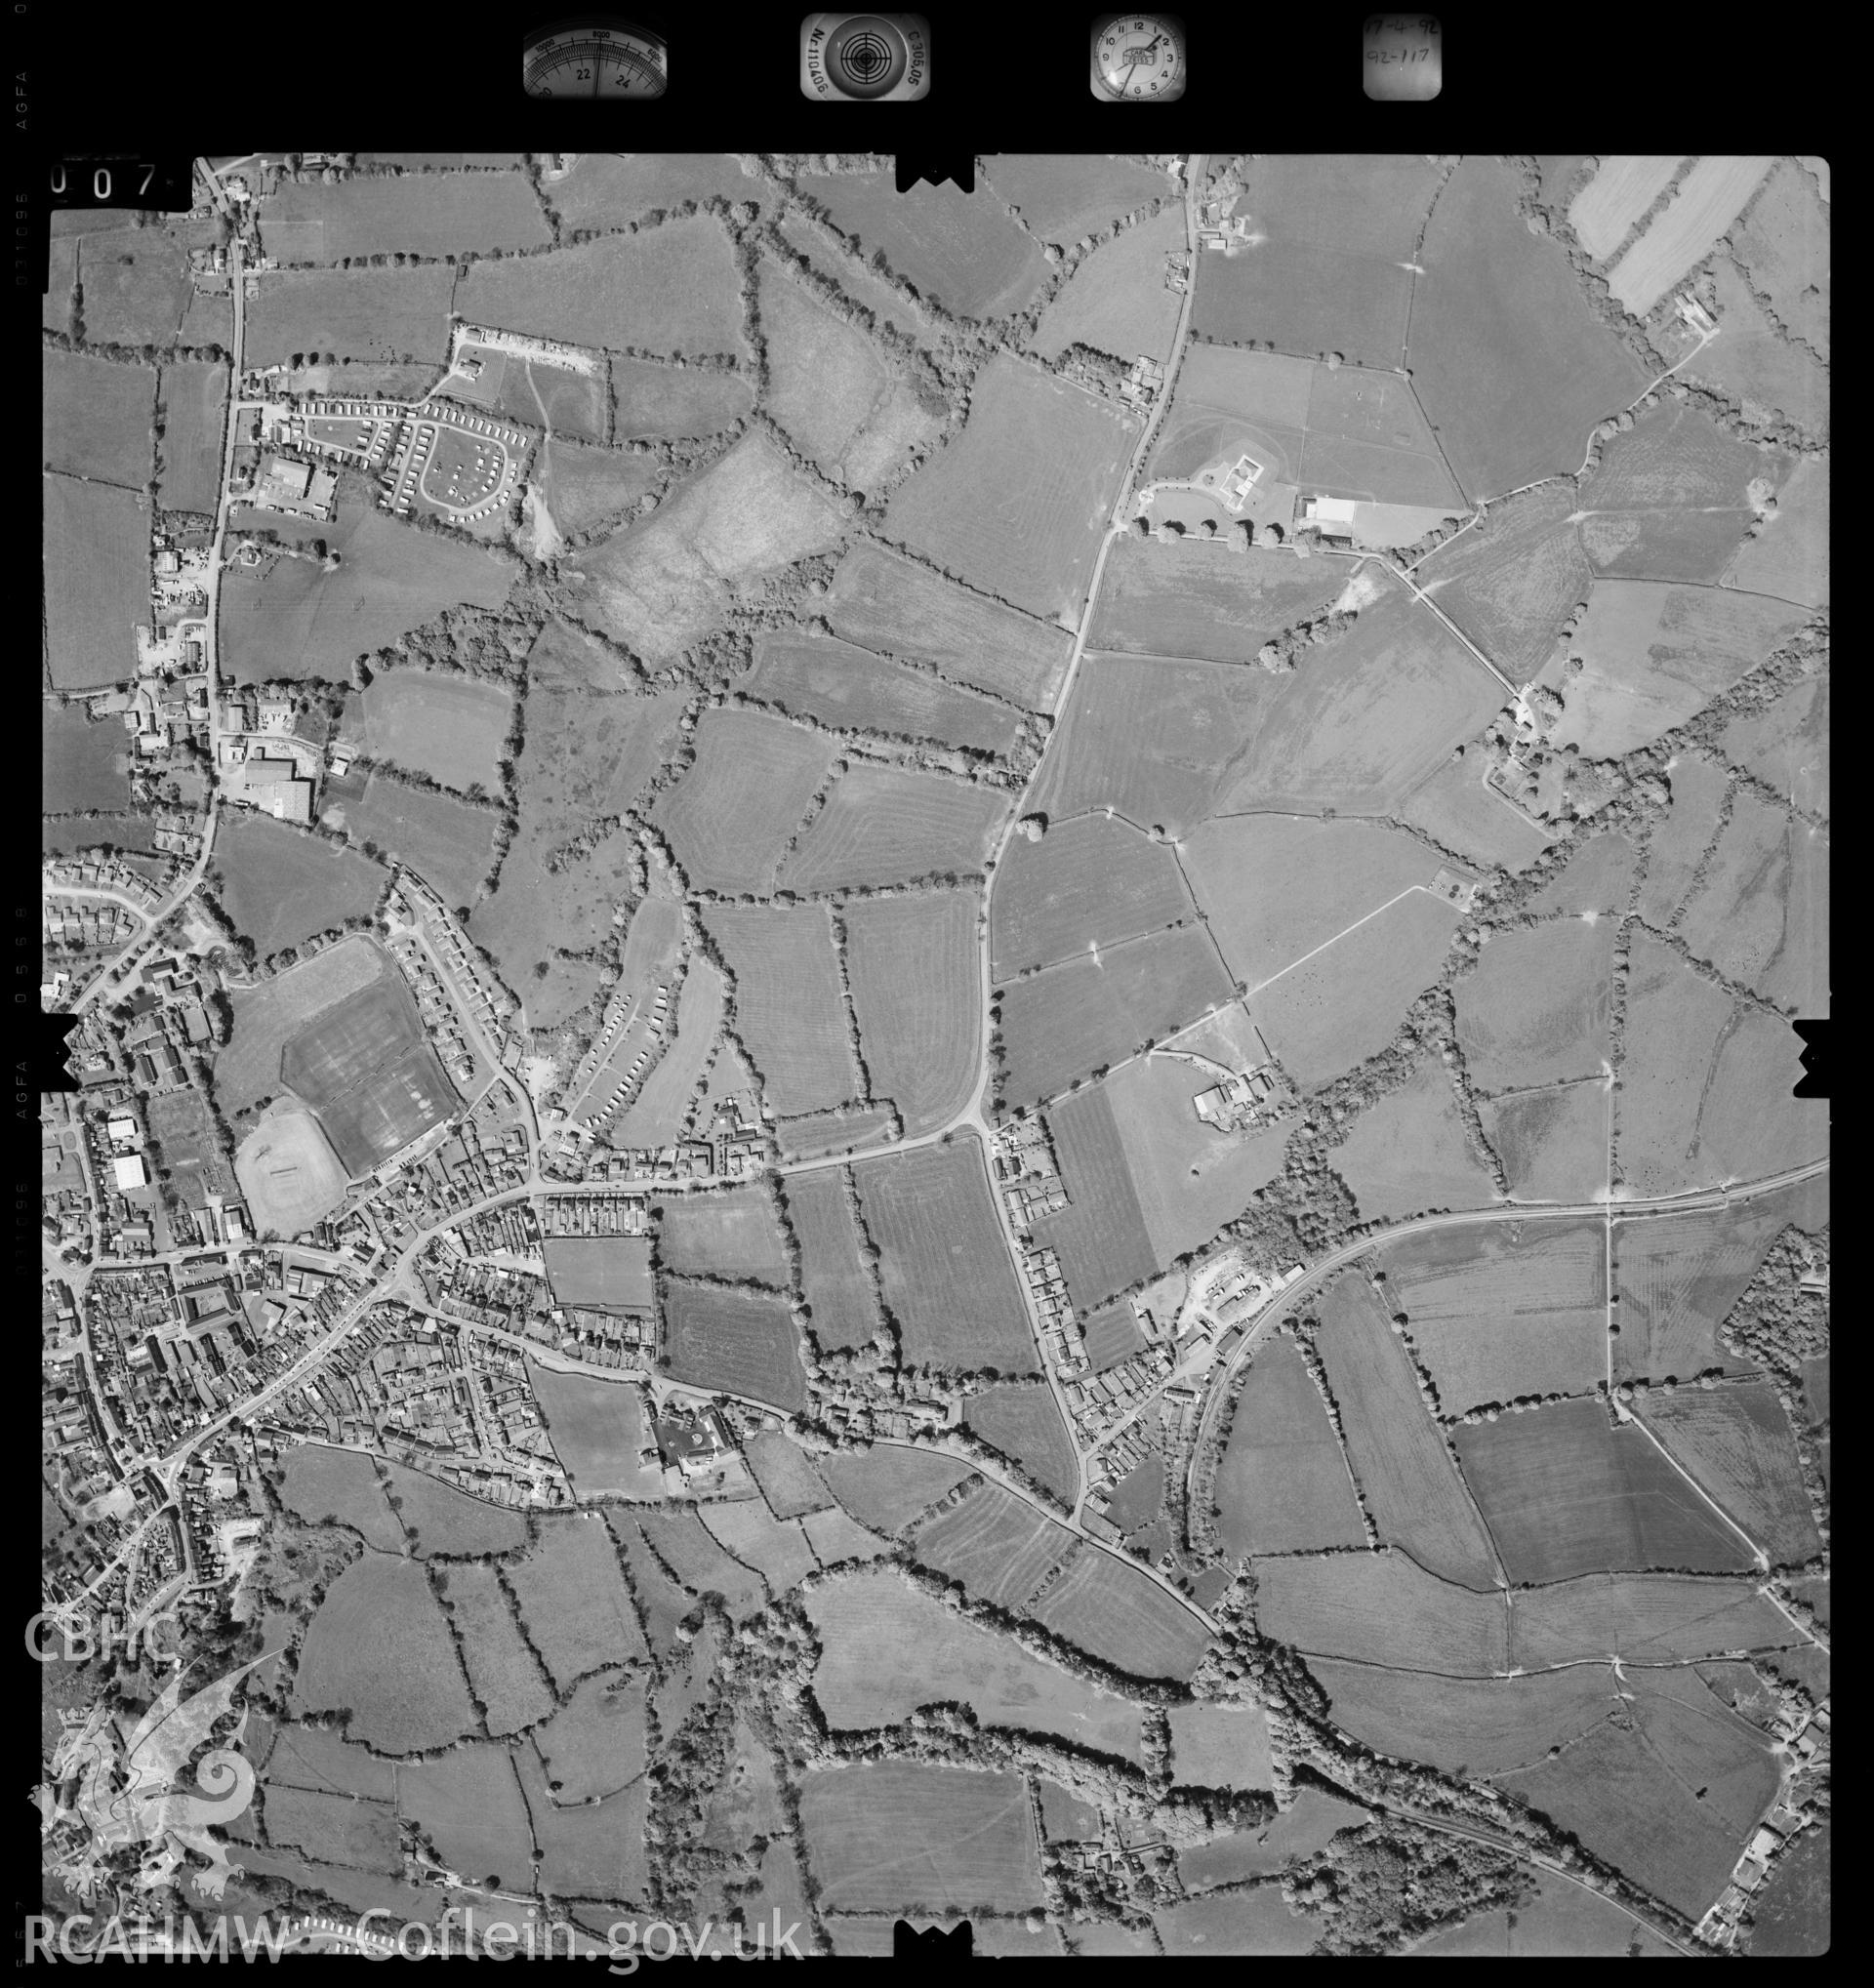 Digitized copy of an aerial photograph showing Narberth area, taken by Ordnance Survey, 1992.